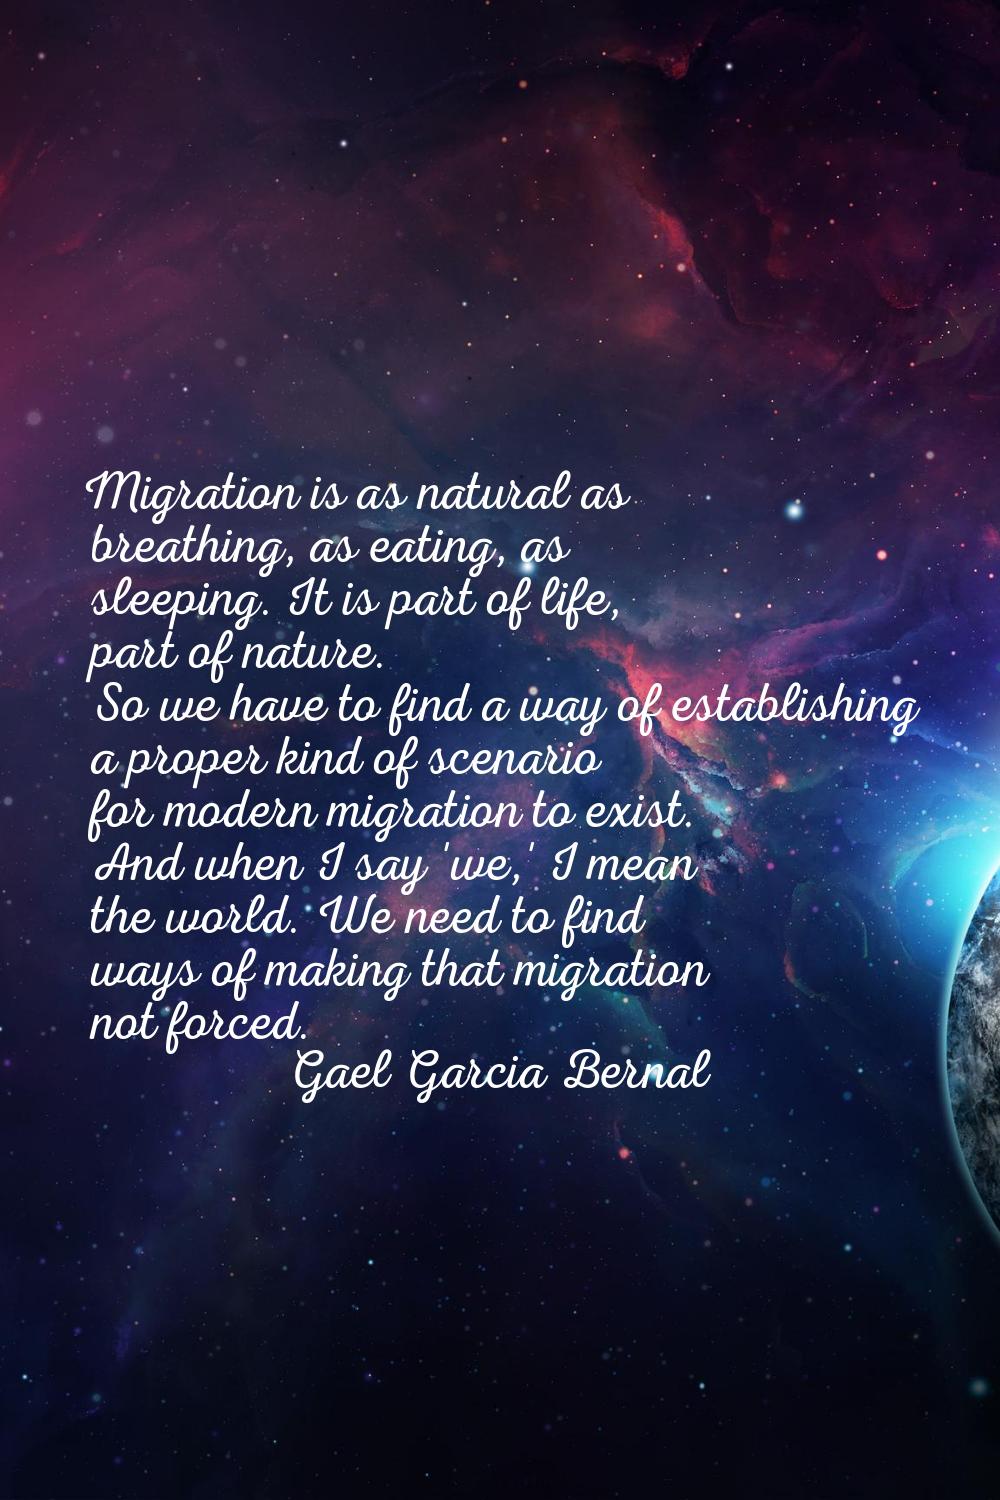 Migration is as natural as breathing, as eating, as sleeping. It is part of life, part of nature. S